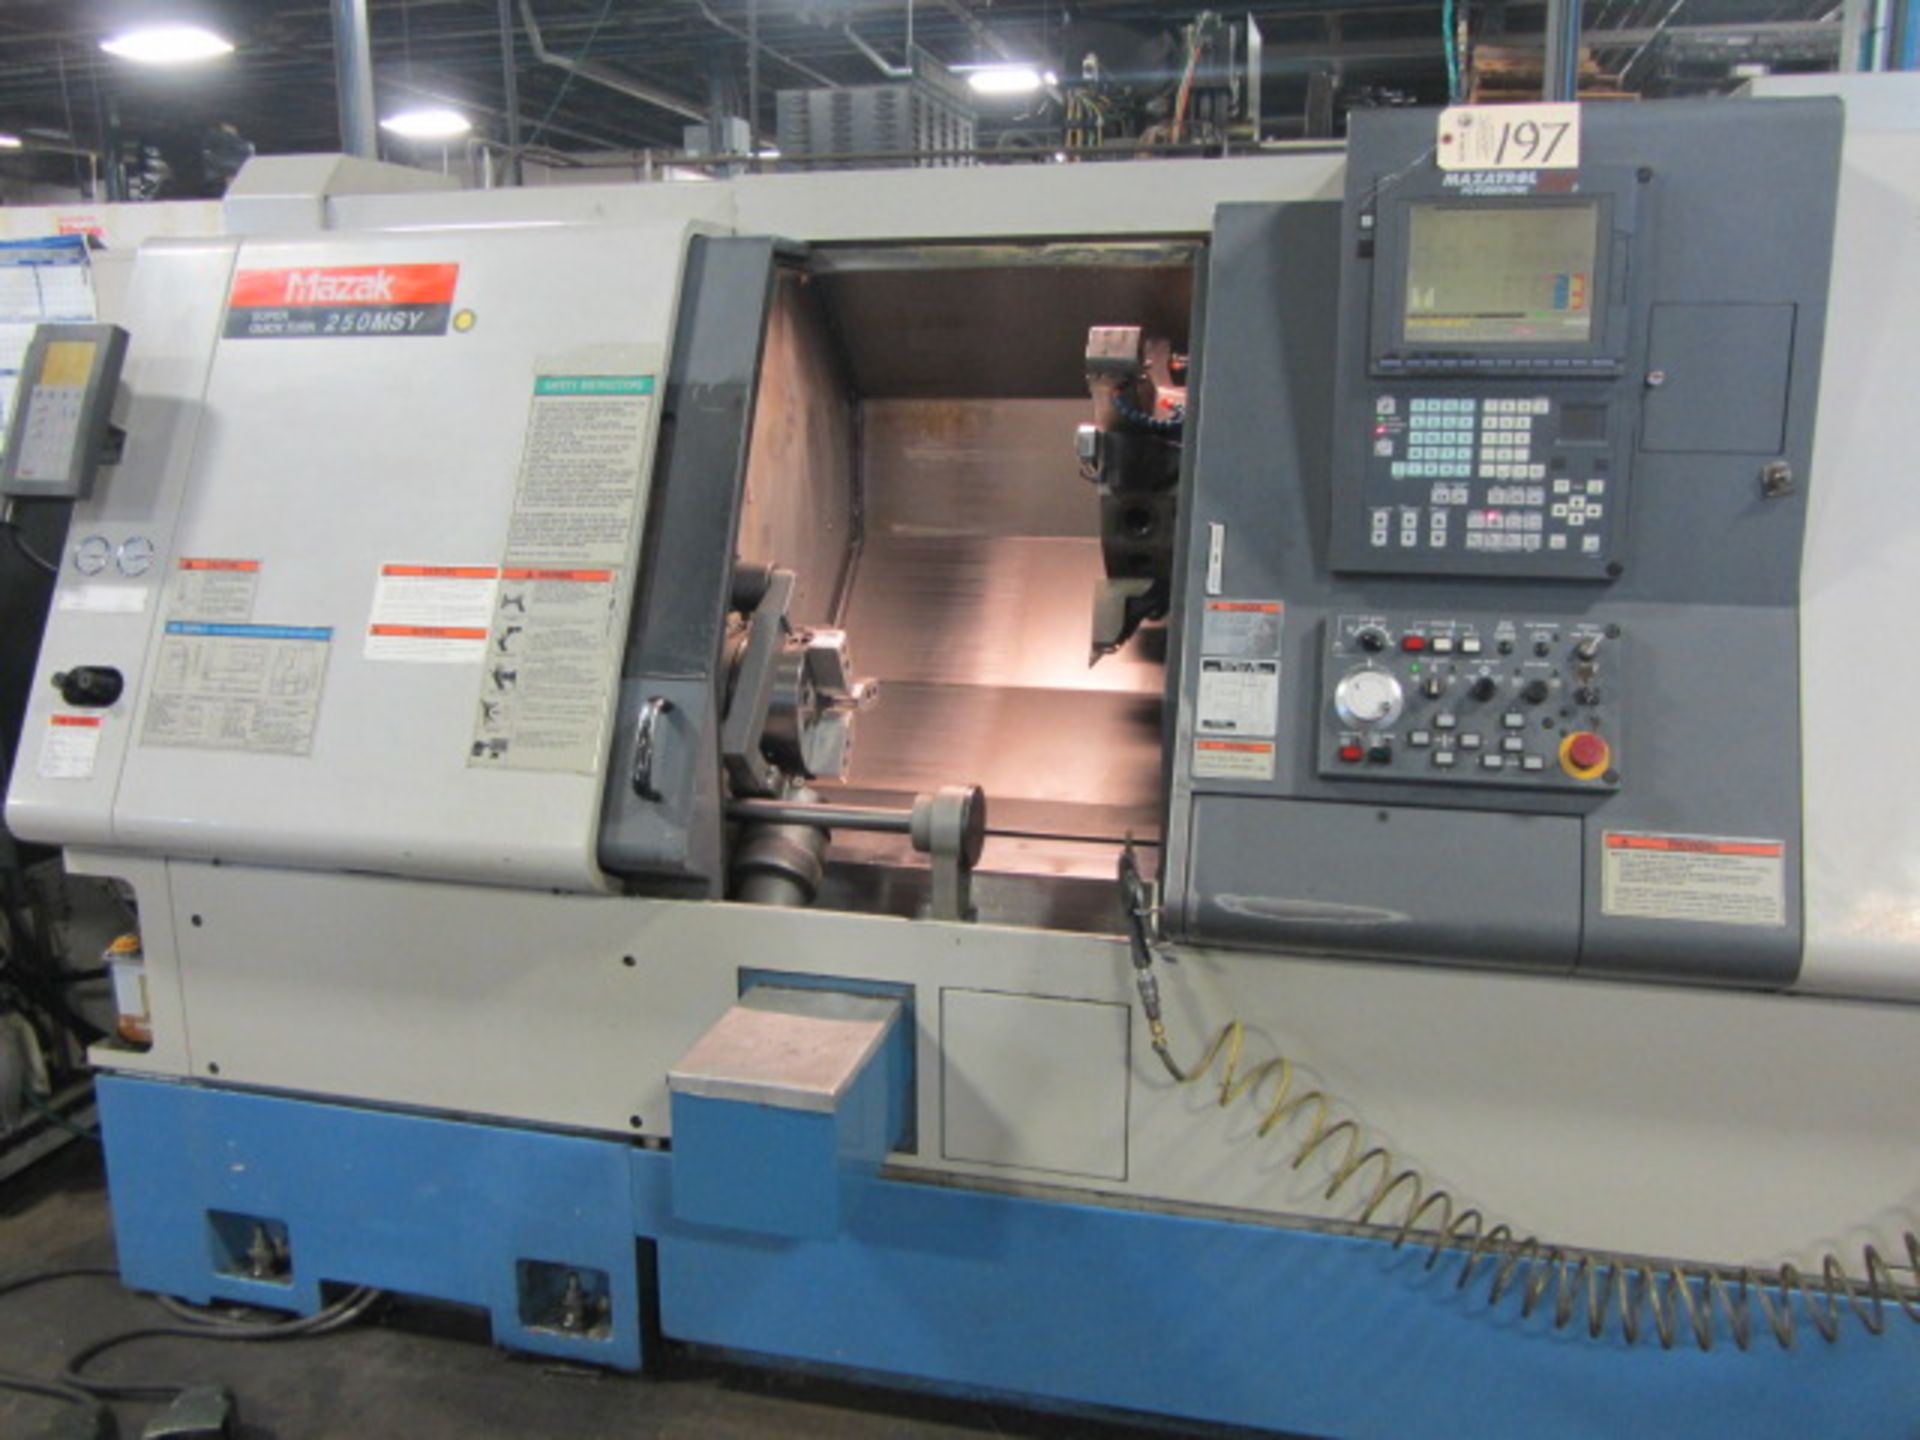 Mazak Super Quick Turn 250-MSY CNC Turning Center with Sub-Spindle, Milling & Y-Axis, 12 Position - Image 3 of 8